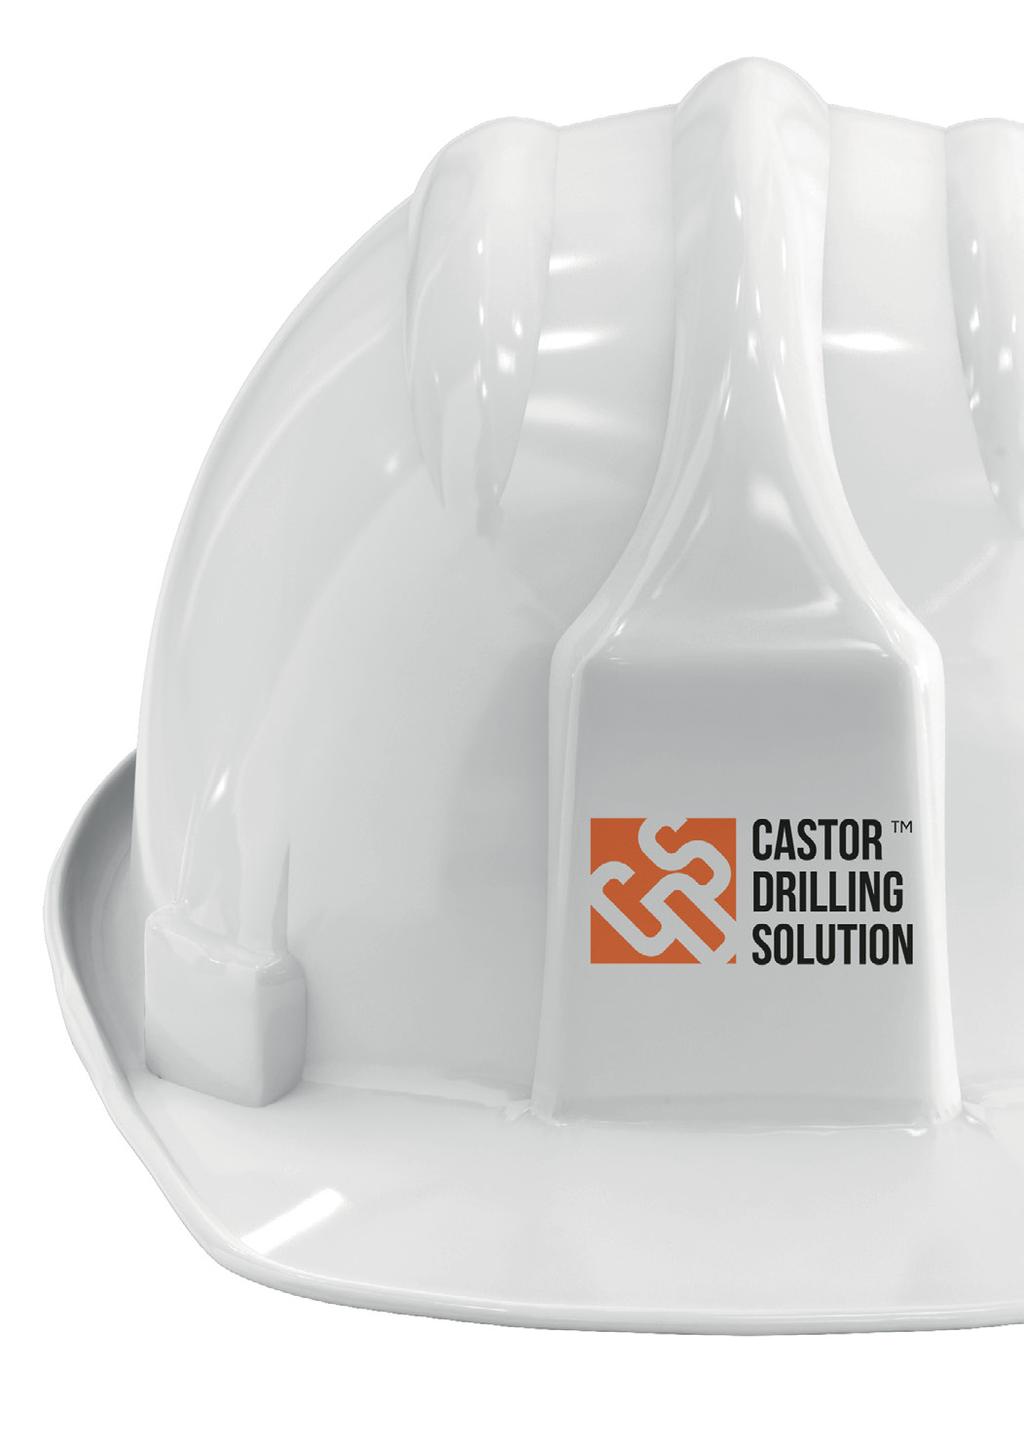 CASTOR DRILLING SOLUTION AS 11 We offer maintenance solutions and repair options ensuring your equipment performs reliably, safely and efficiently - minimizing downtime and extending the life cycle